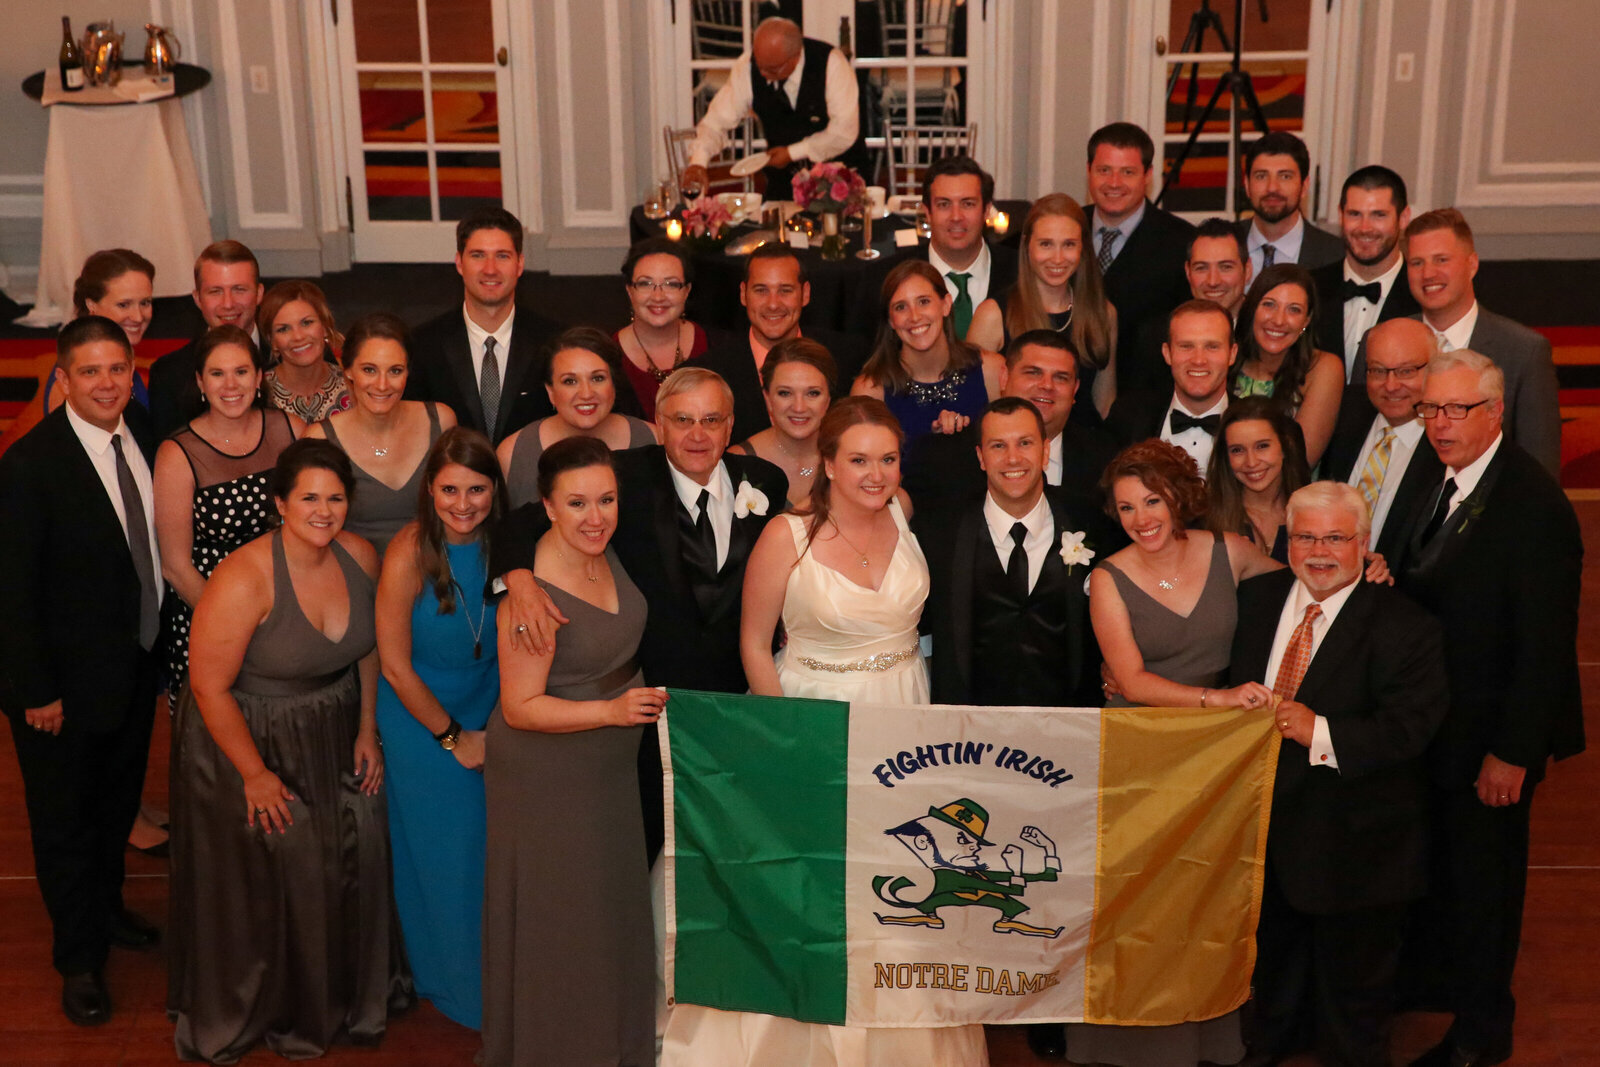 Bride and groom stand with their wedding guests holding University of Notre Dame flag